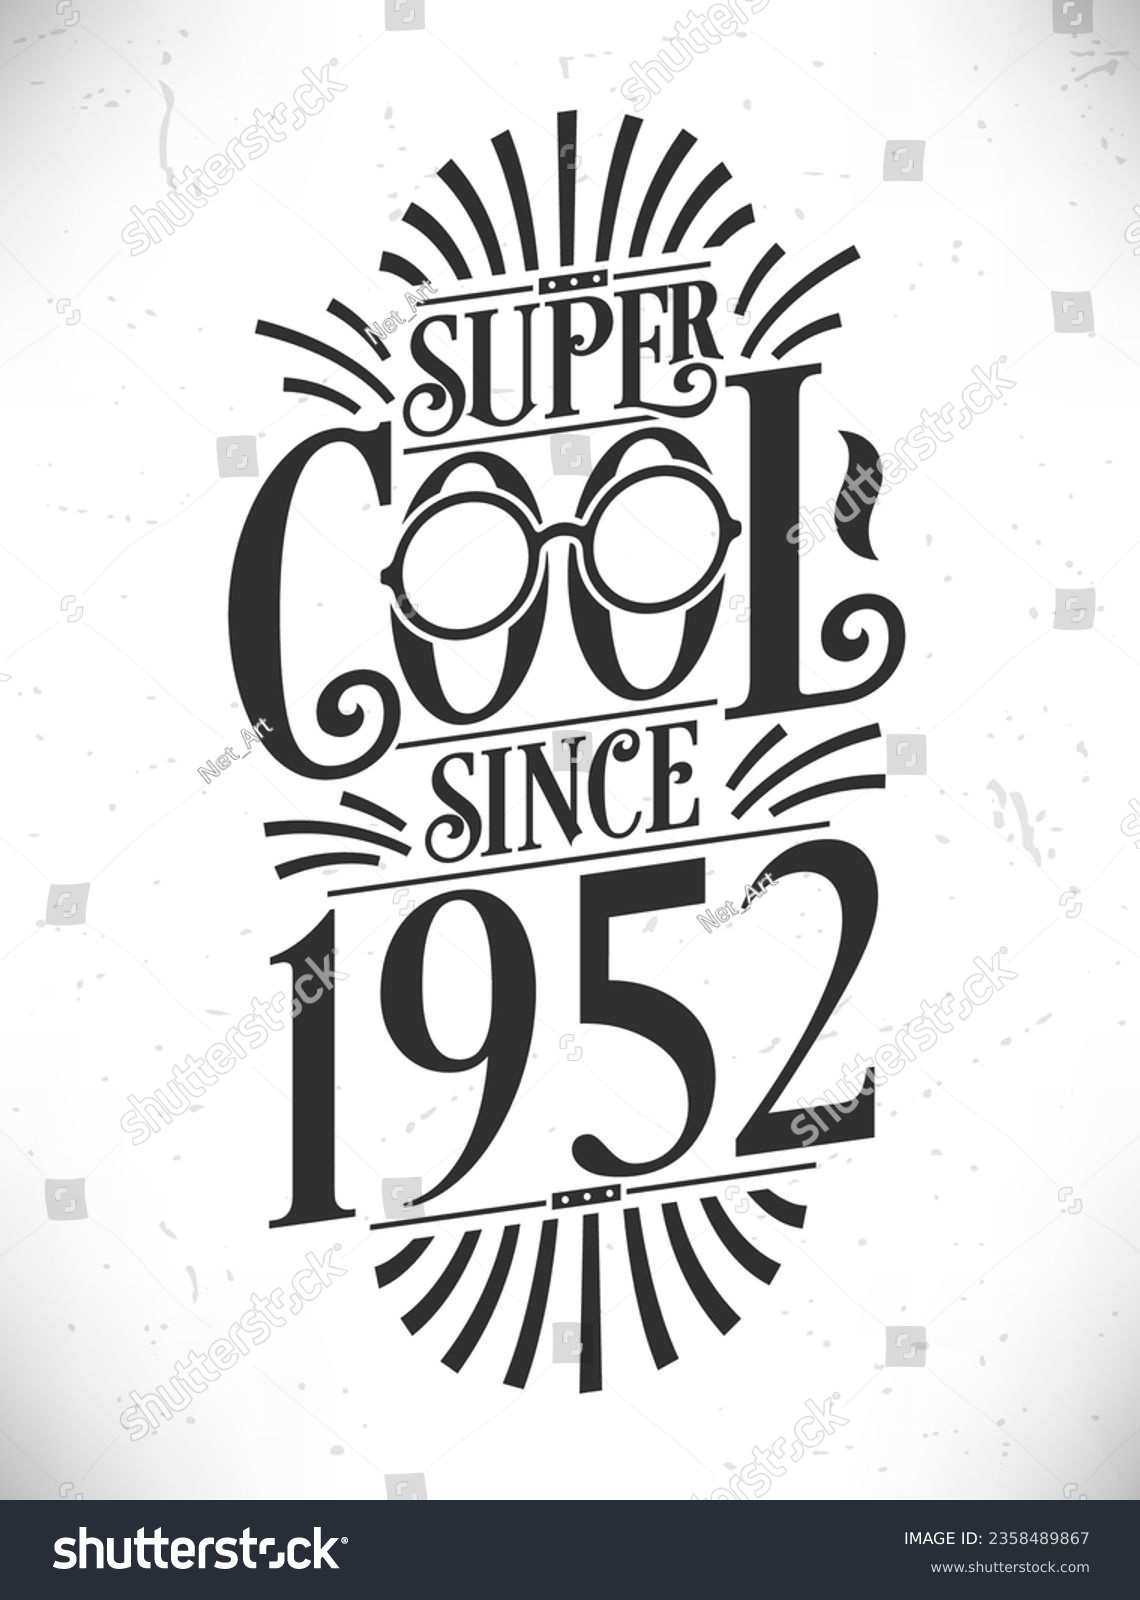 SVG of Super Cool since 1952. Born in 1952 Typography Birthday Lettering Design. svg